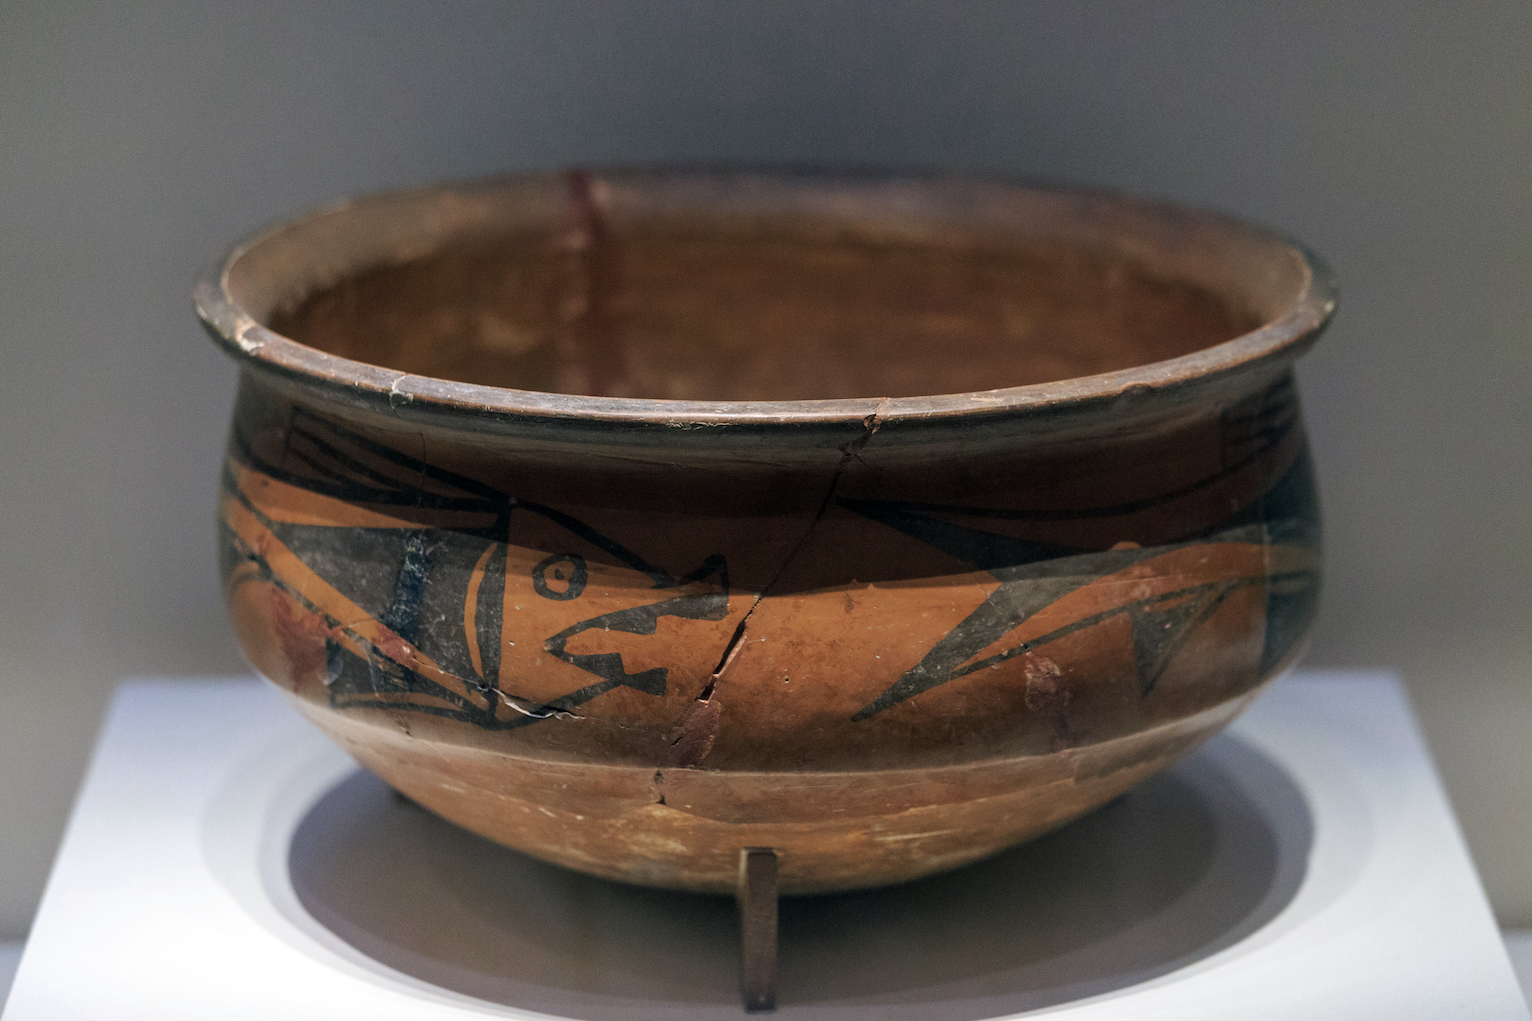 Pot with fish designs, Yangshao culture, Neolithic period, from Banpo, China (National Museum of China; photo: Zhangzhugang, CC BY-SA 3.0)